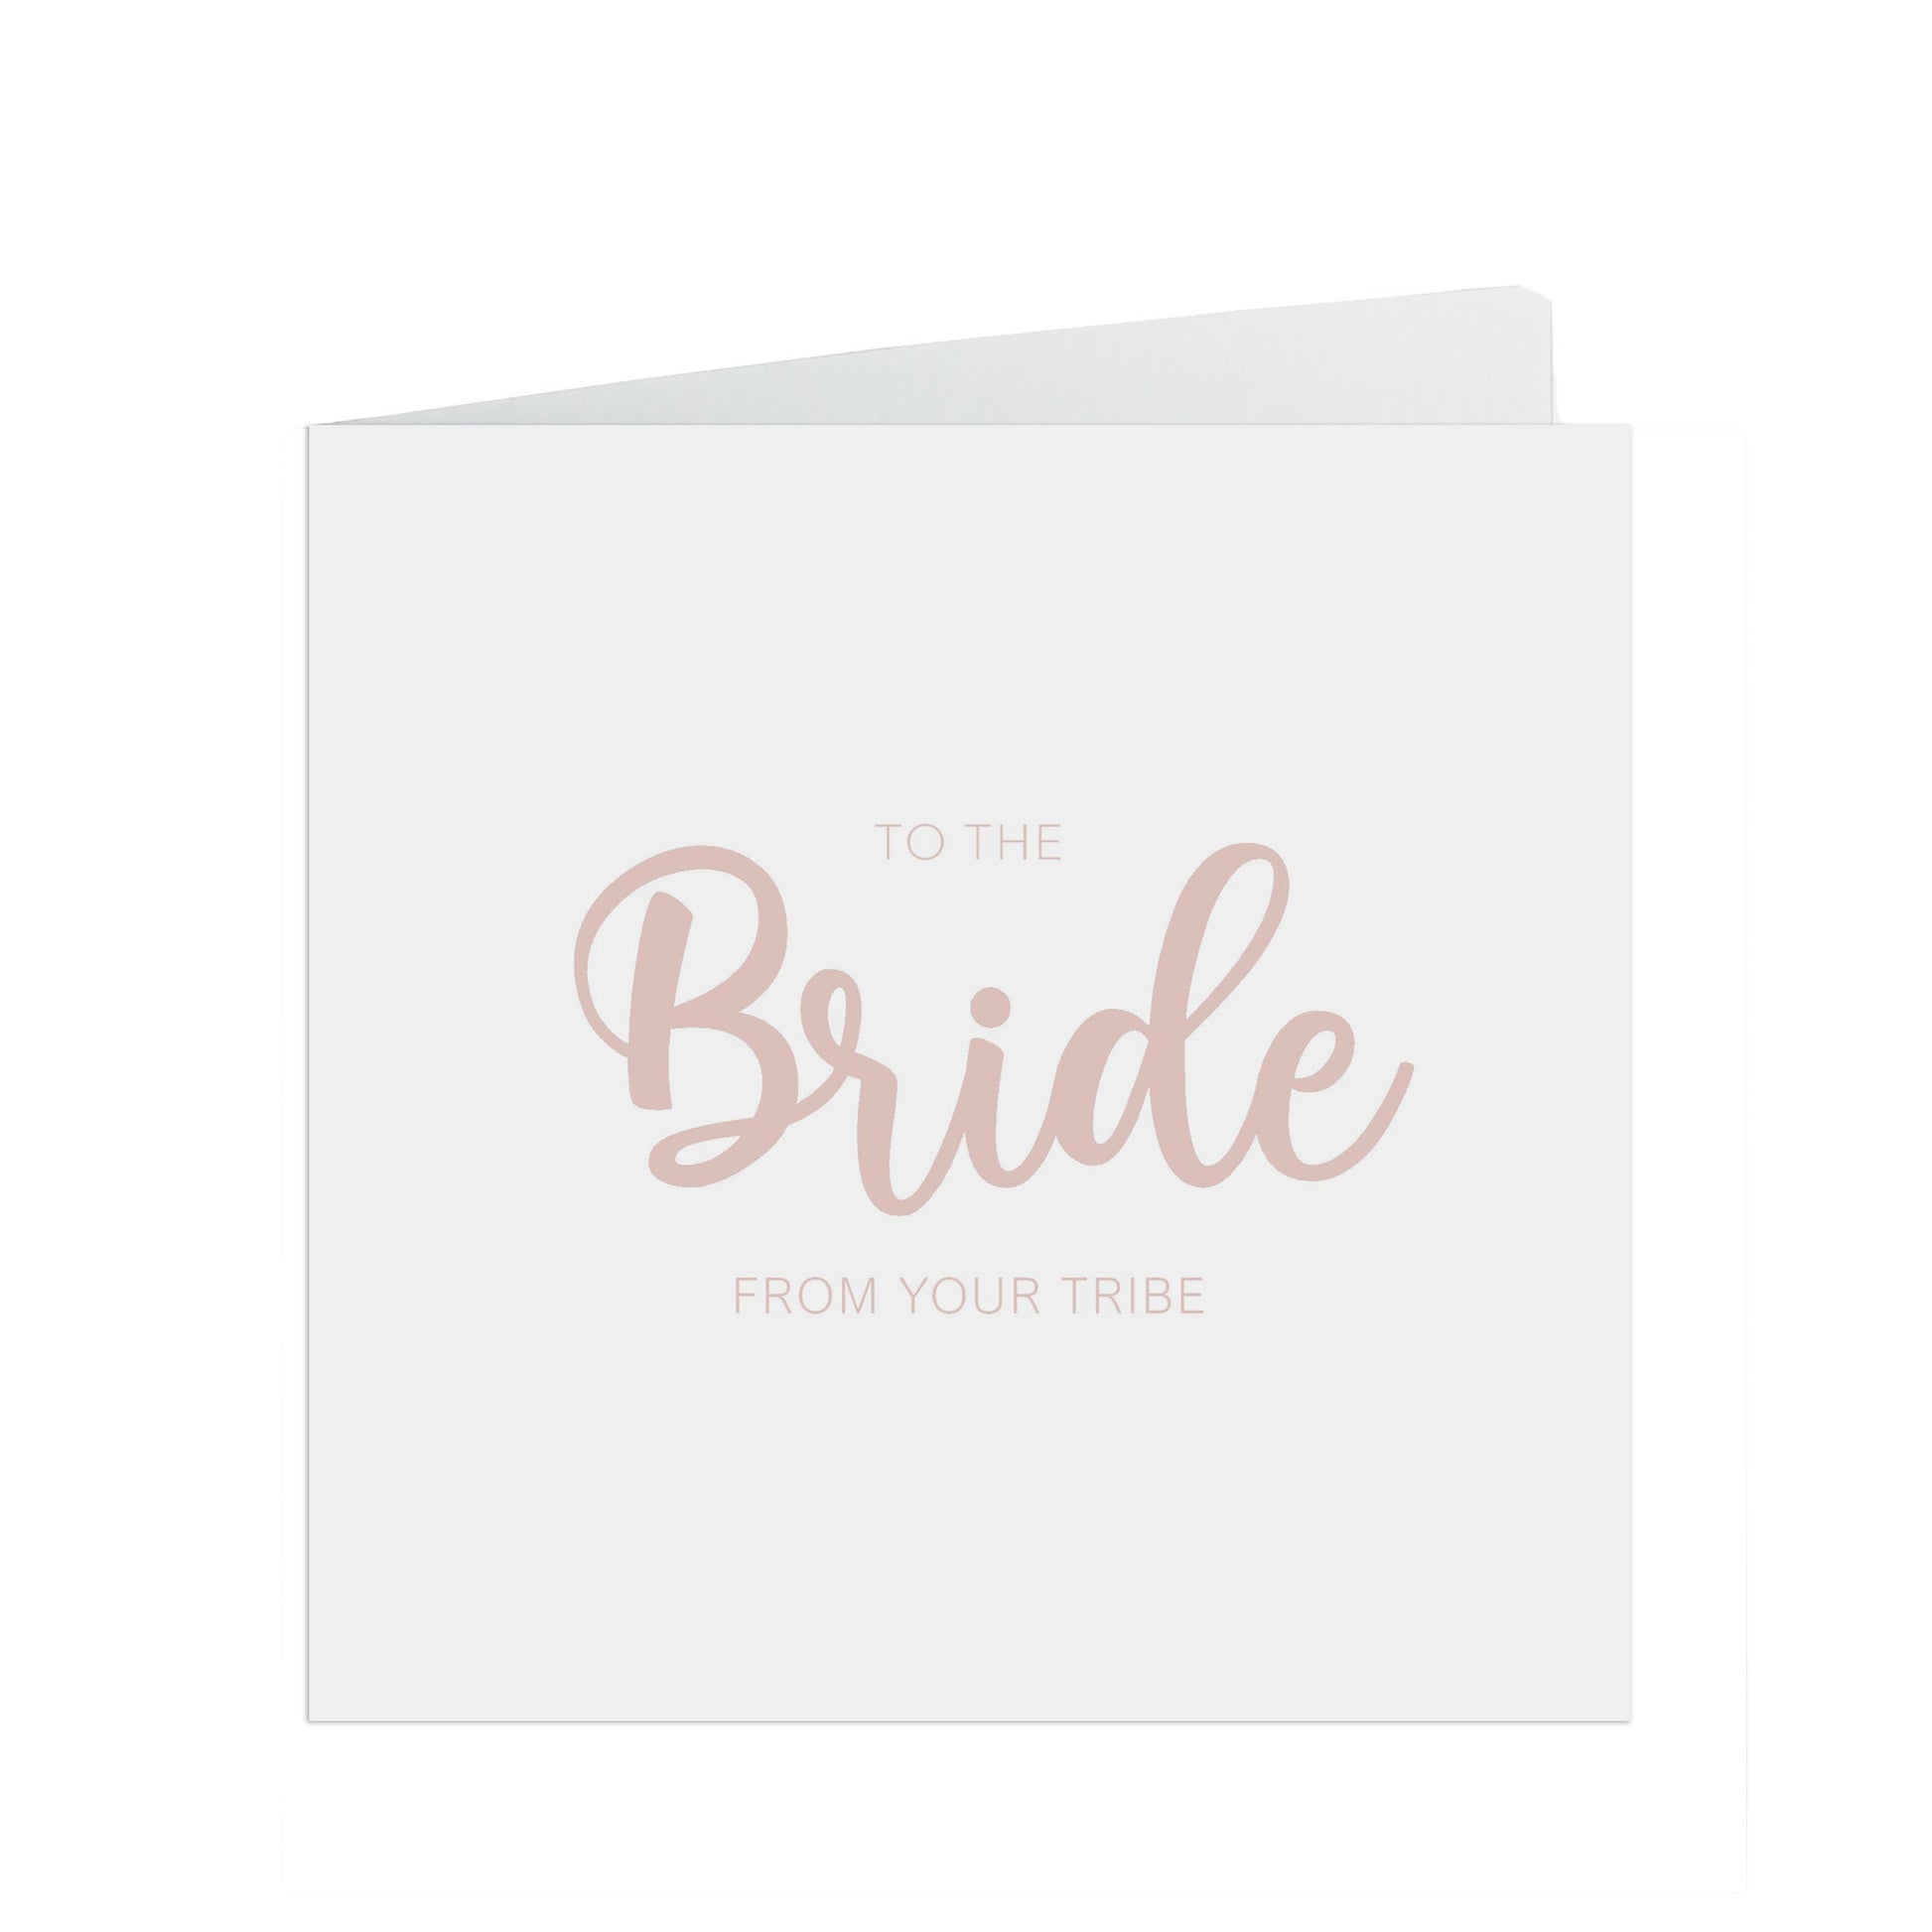 Bride From Your Tribe, Rose Gold Effect 6x6 Inches In Size With A White Envelope